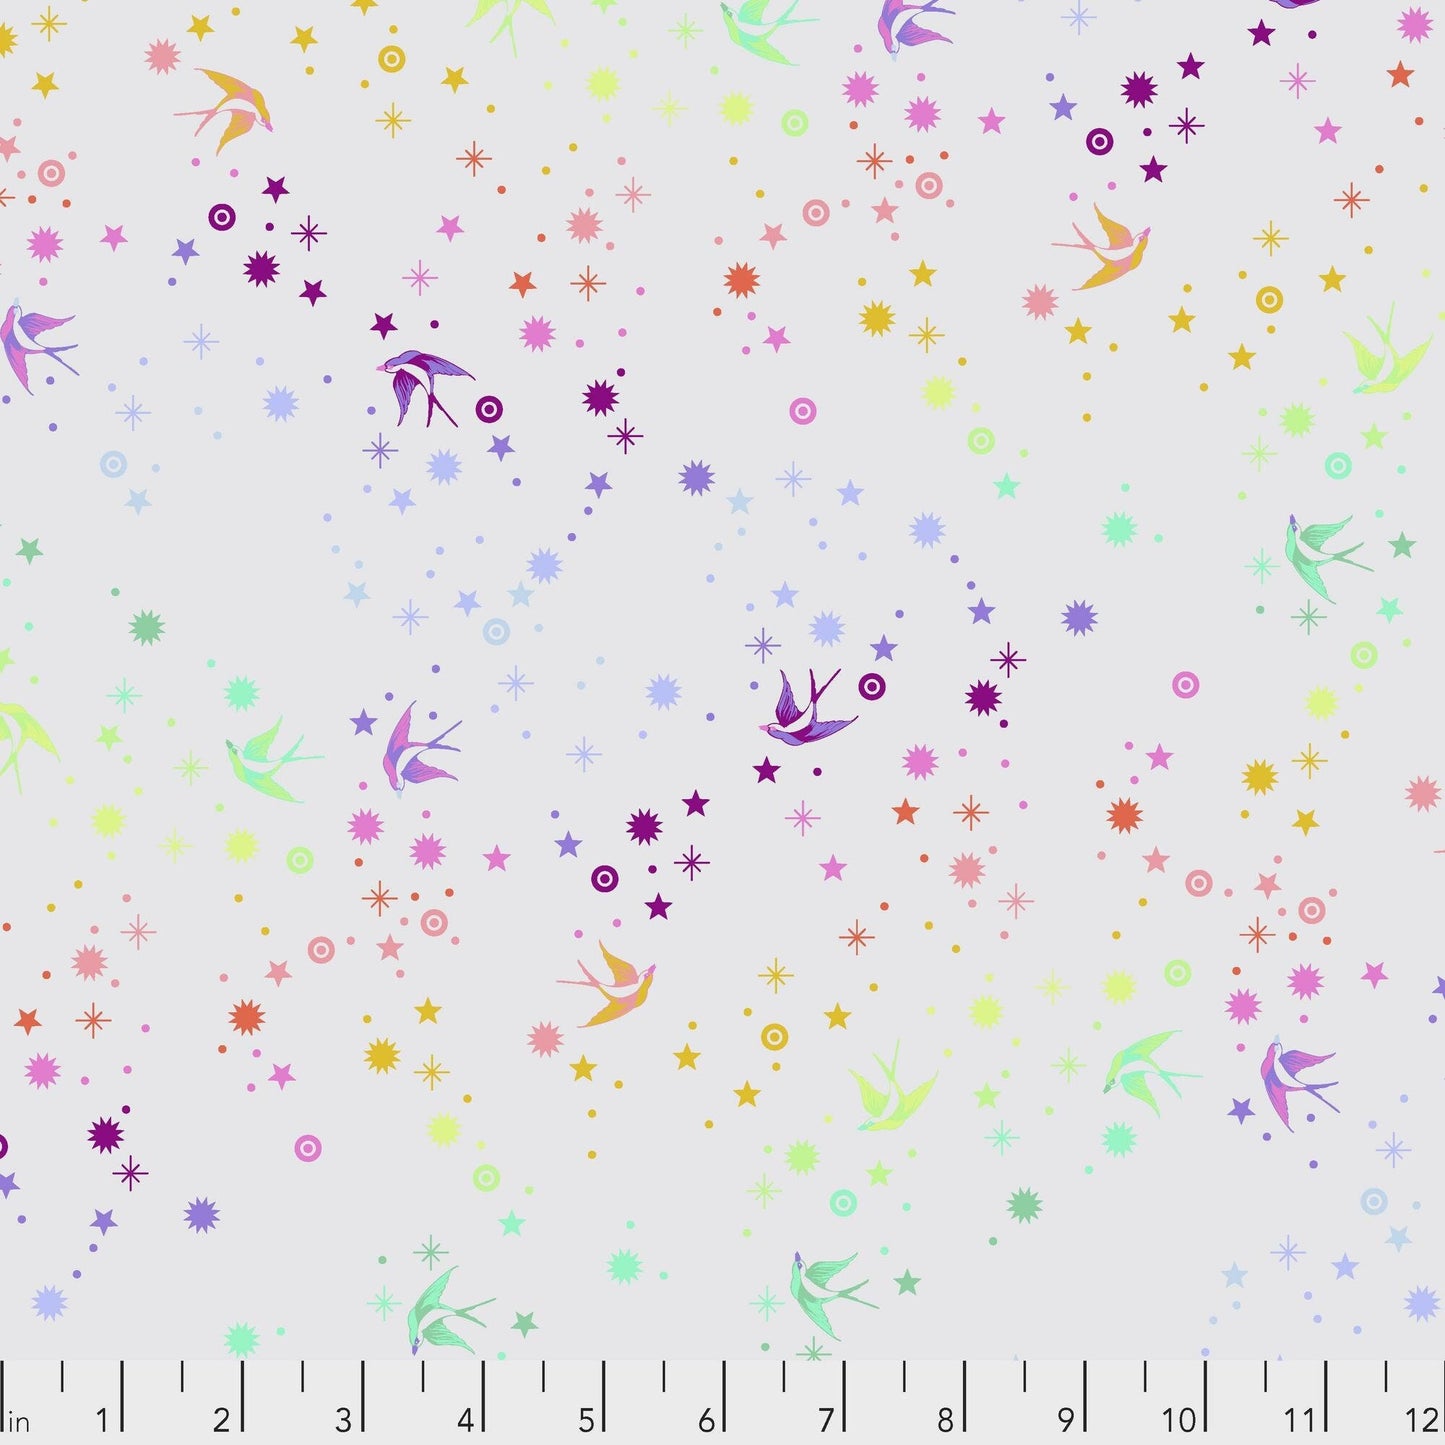 Tula Pink Fairy Dust WHISPER PWTP133, Free Spirit Fabric, Quilt Fabric, Cotton Fabric, Celestial Fabric, Quilting Fabric, Fabric By The Yard